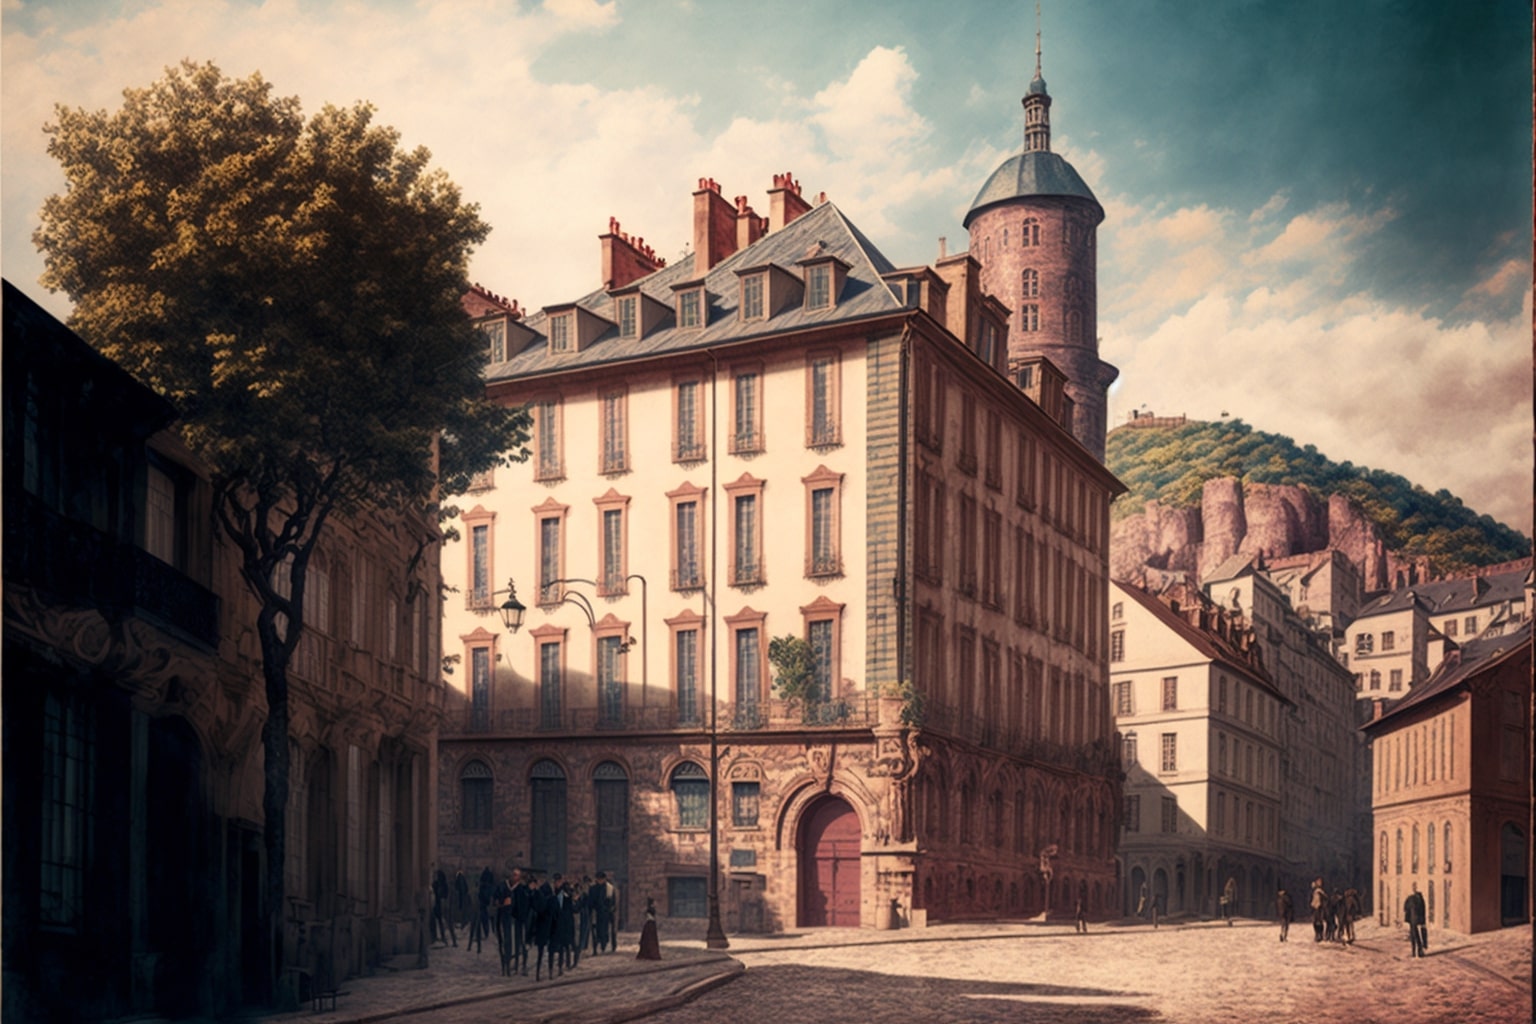 Painting of a street with a building in the background.